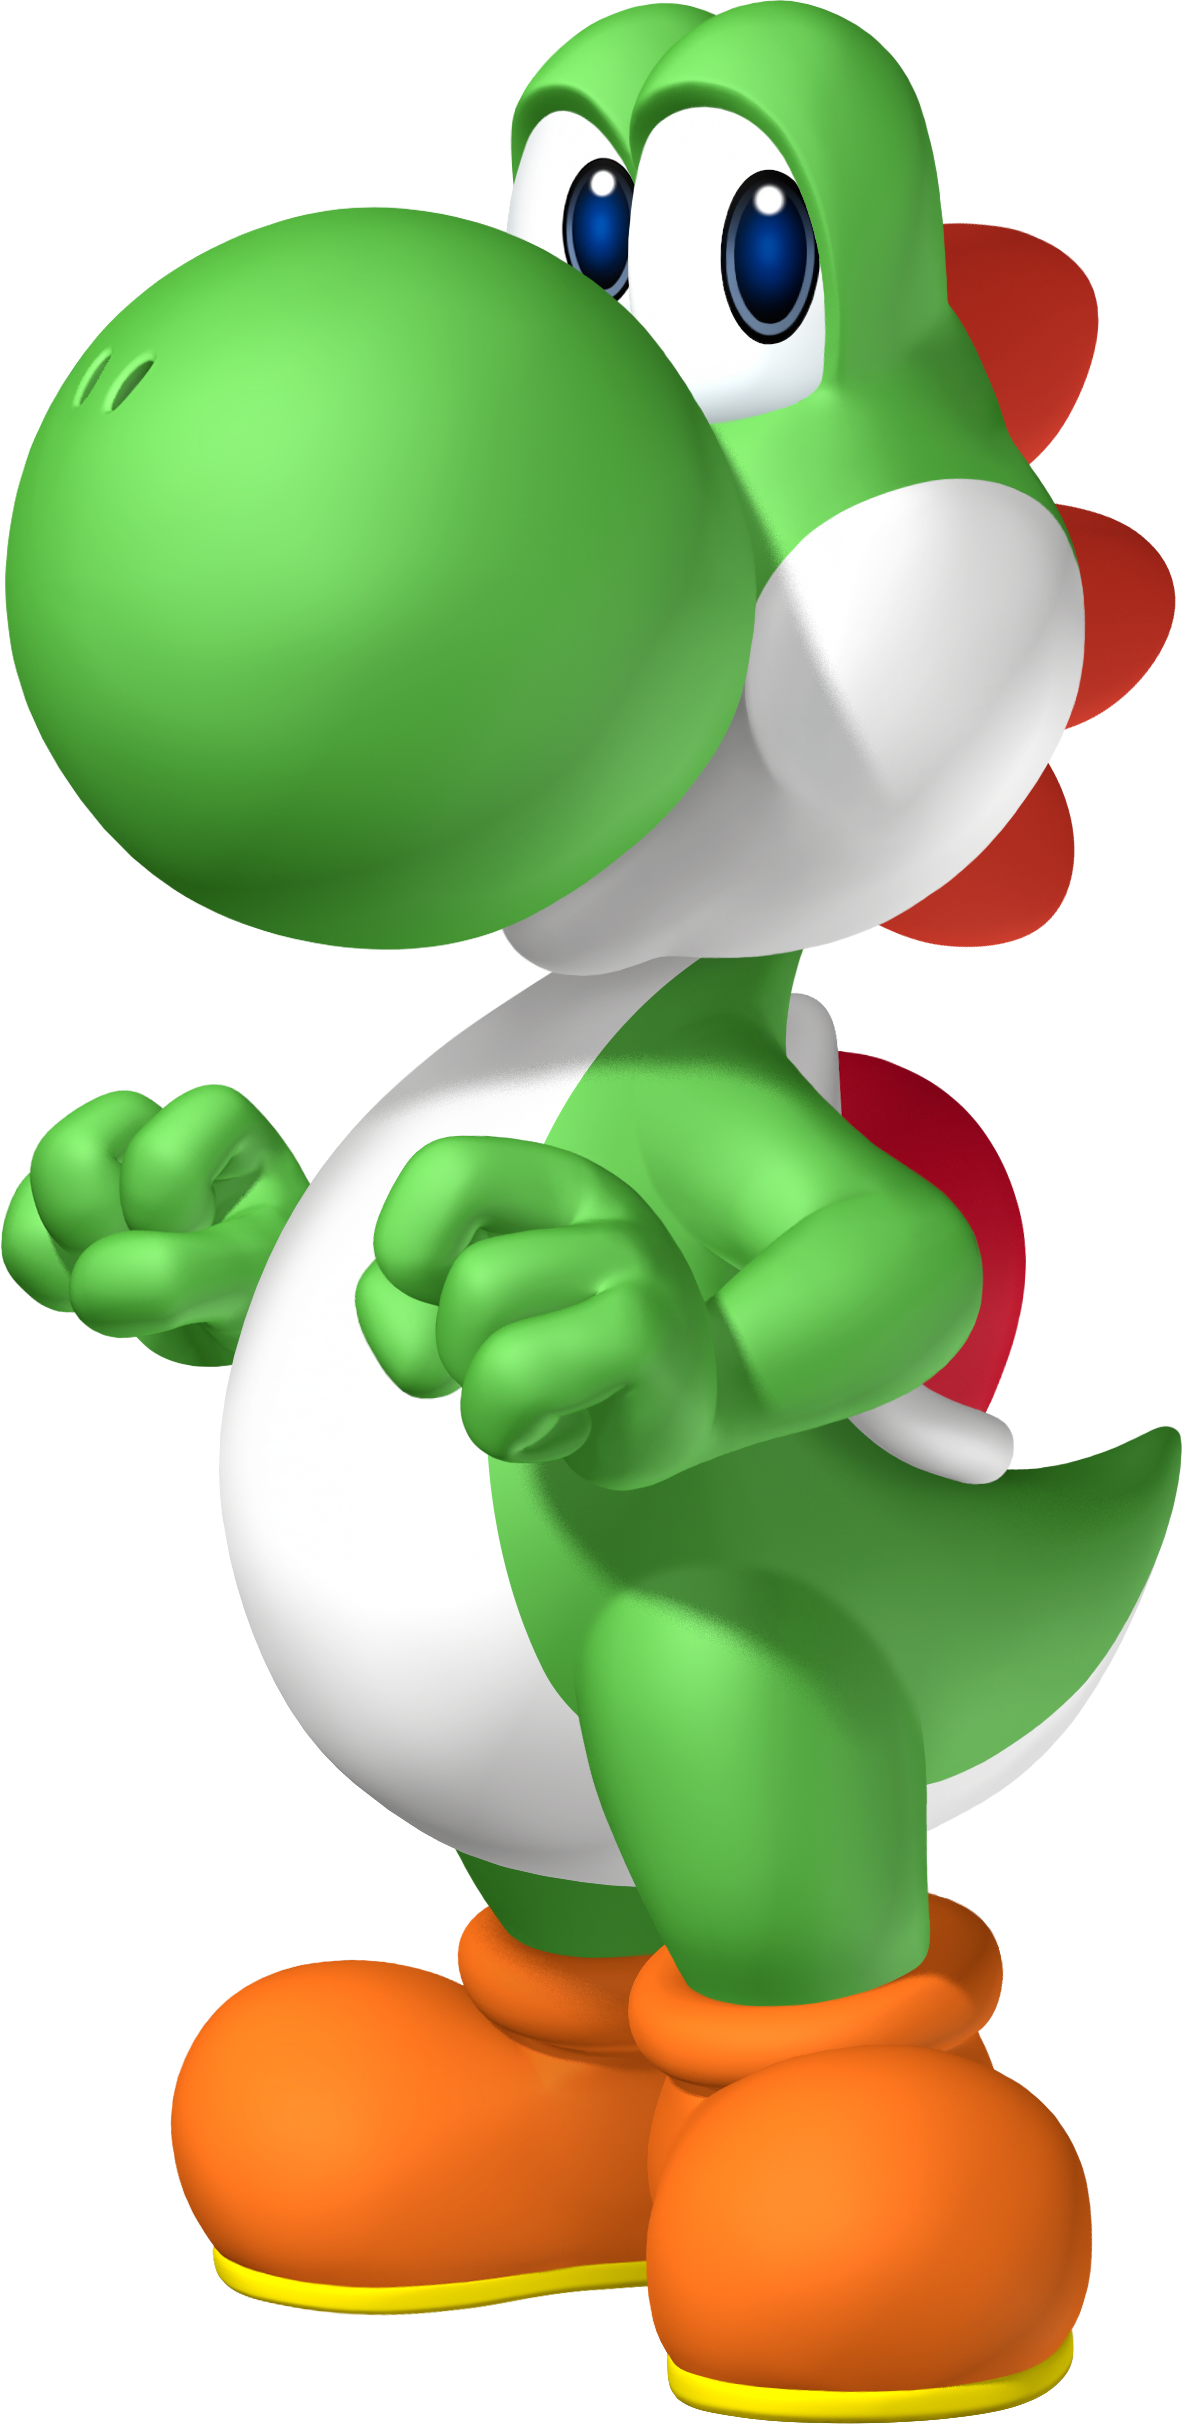 Artwork of Yoshi for Mario Party 8 (reused for Mario & Sonic at the Rio 2016 Olympic Games)